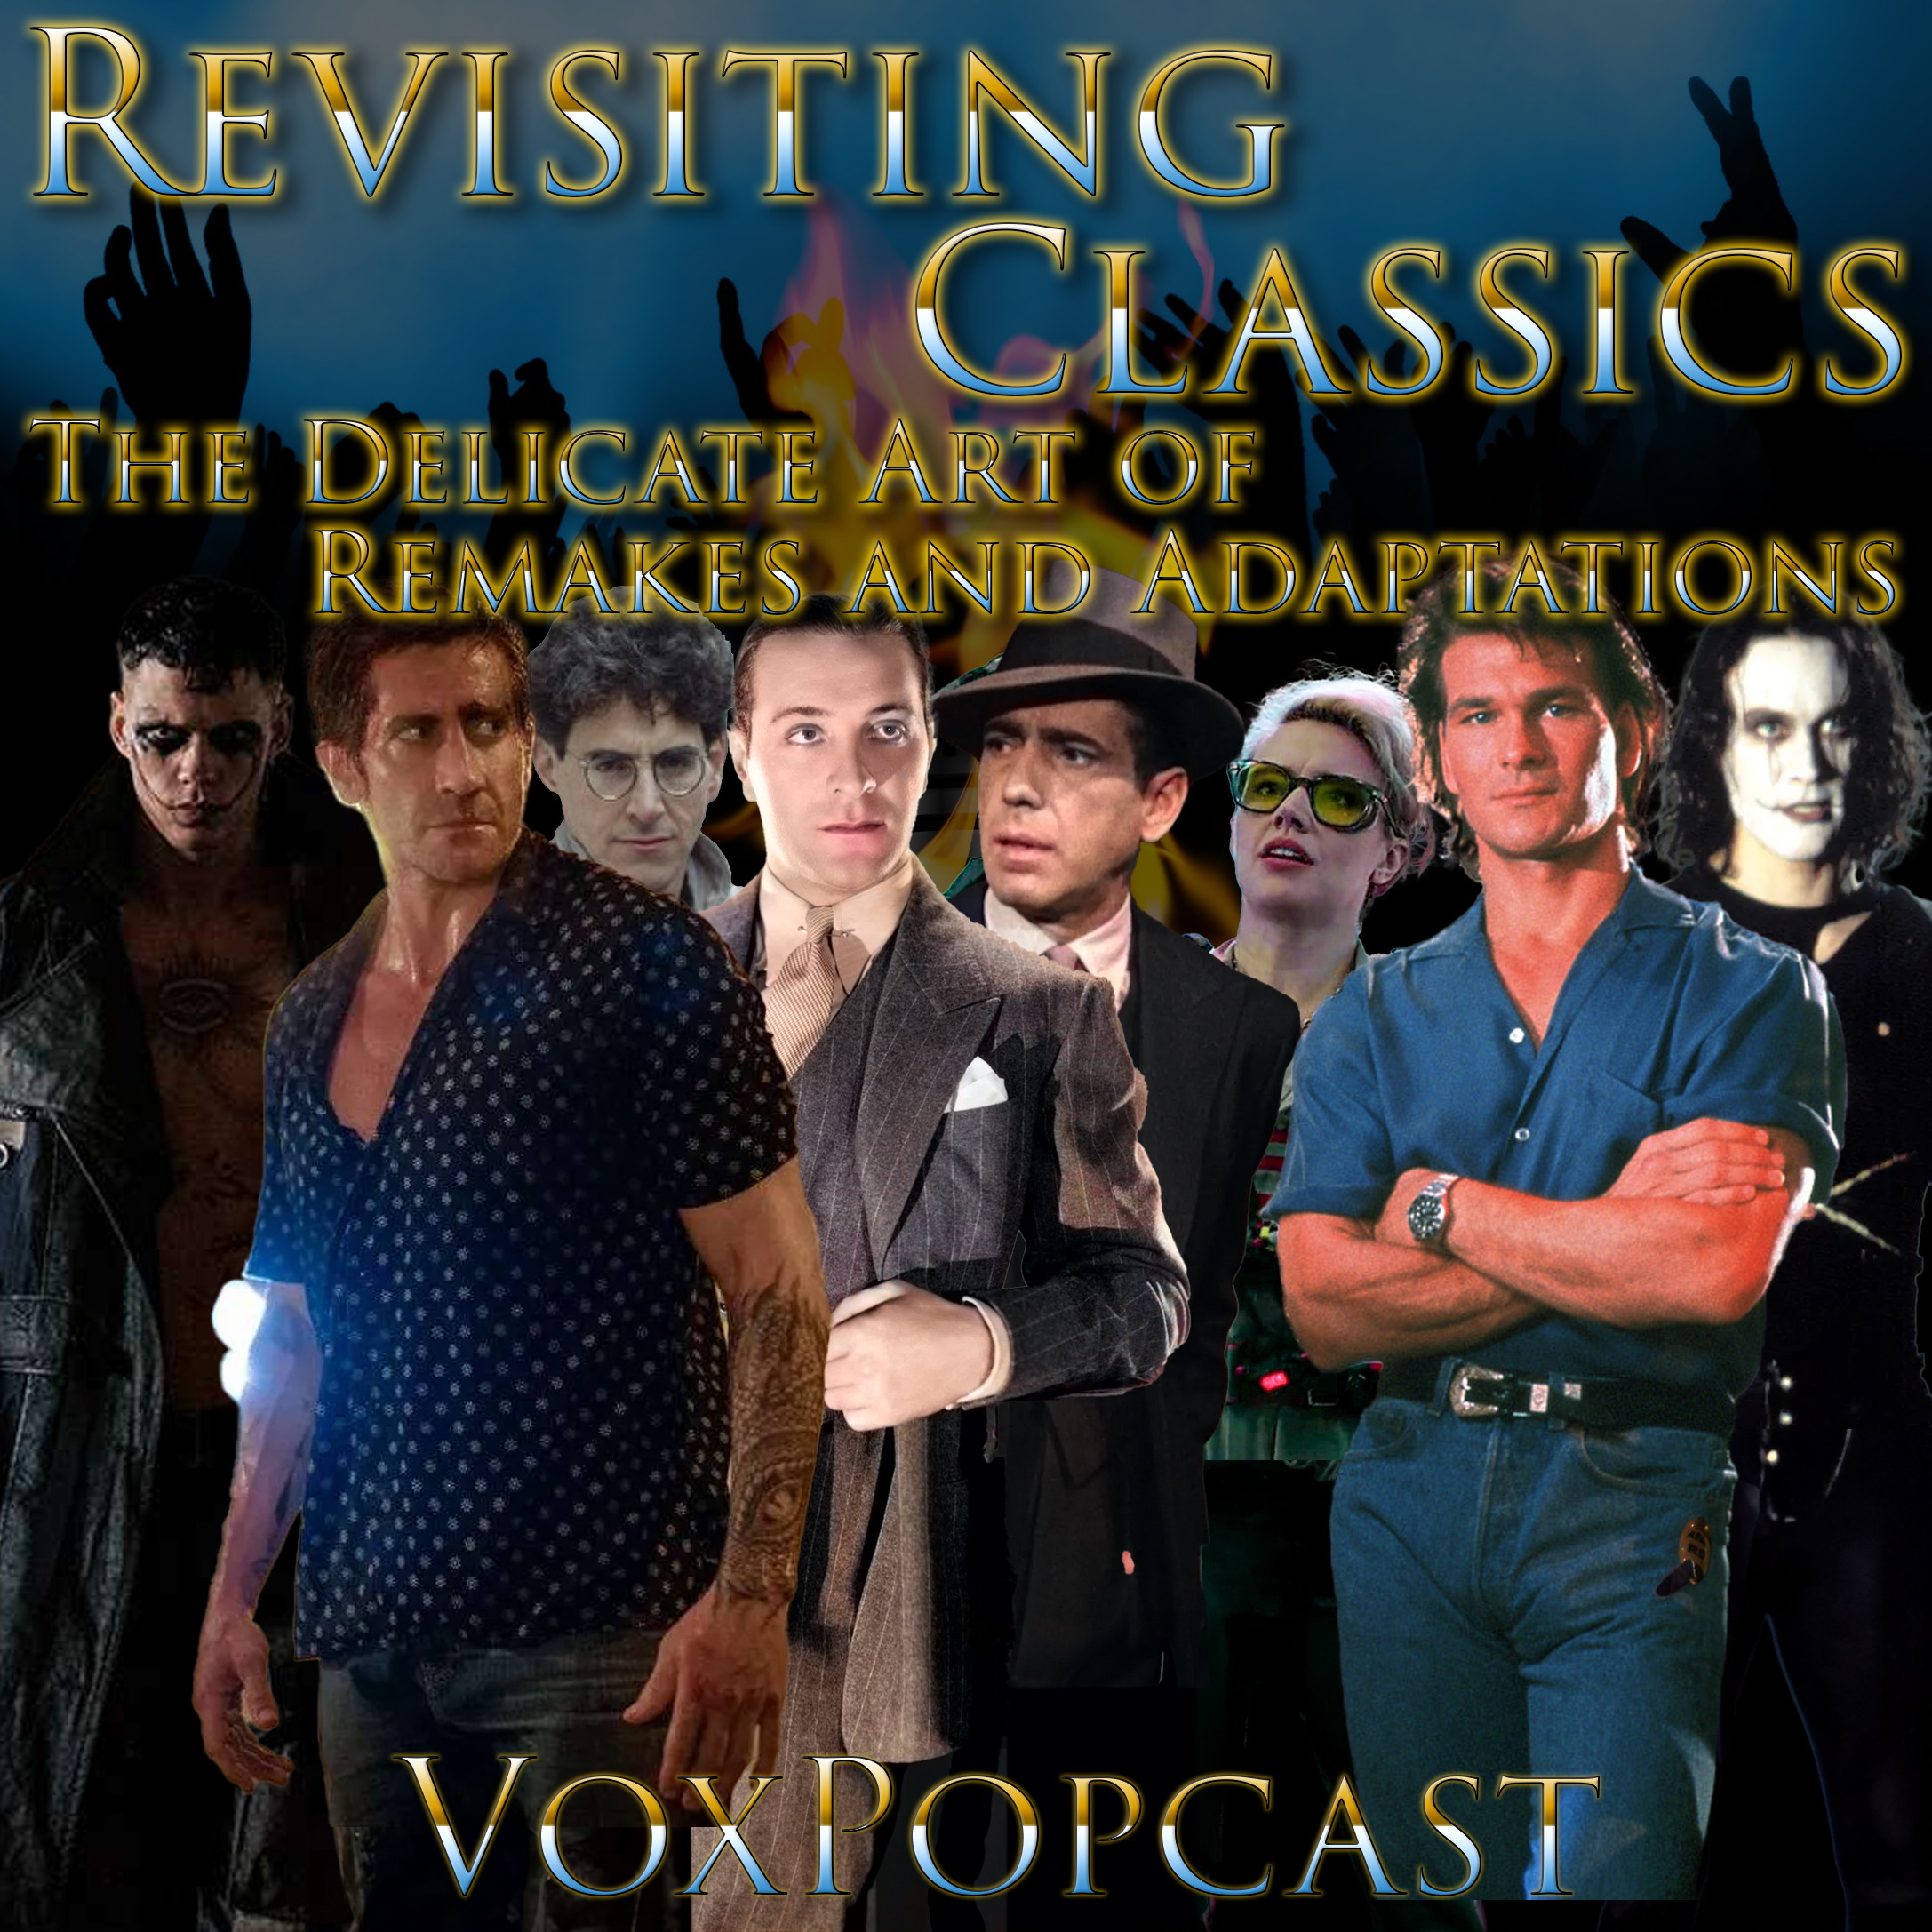 e315. Revisiting Classics: The Delicate Art of Remakes and Adaptations